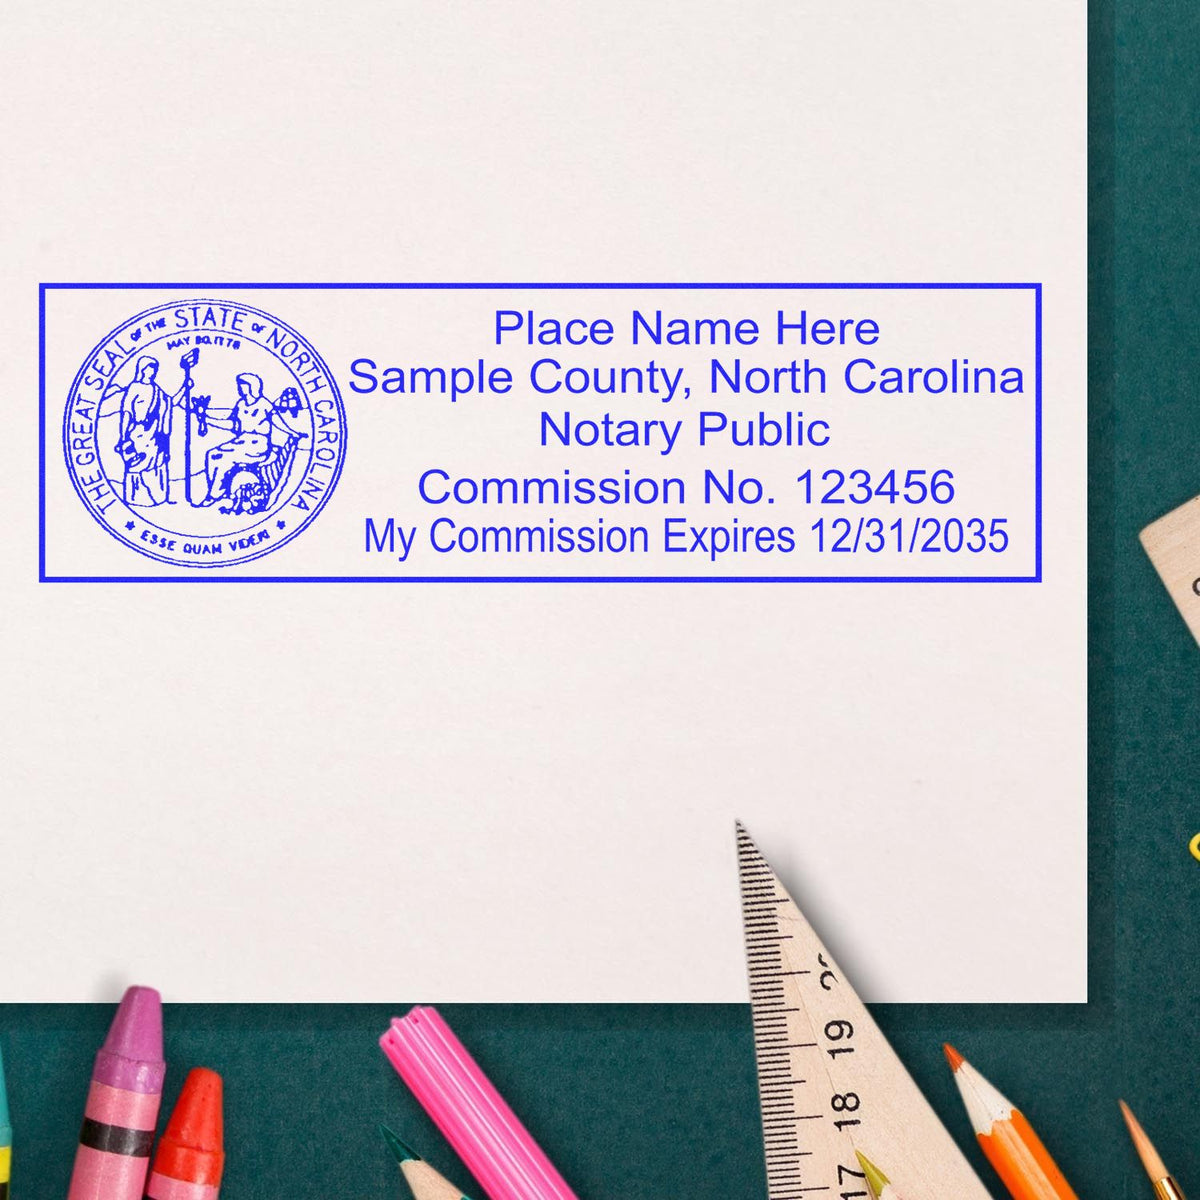 A stamped impression of the Super Slim North Carolina Notary Public Stamp in this stylish lifestyle photo, setting the tone for a unique and personalized product.